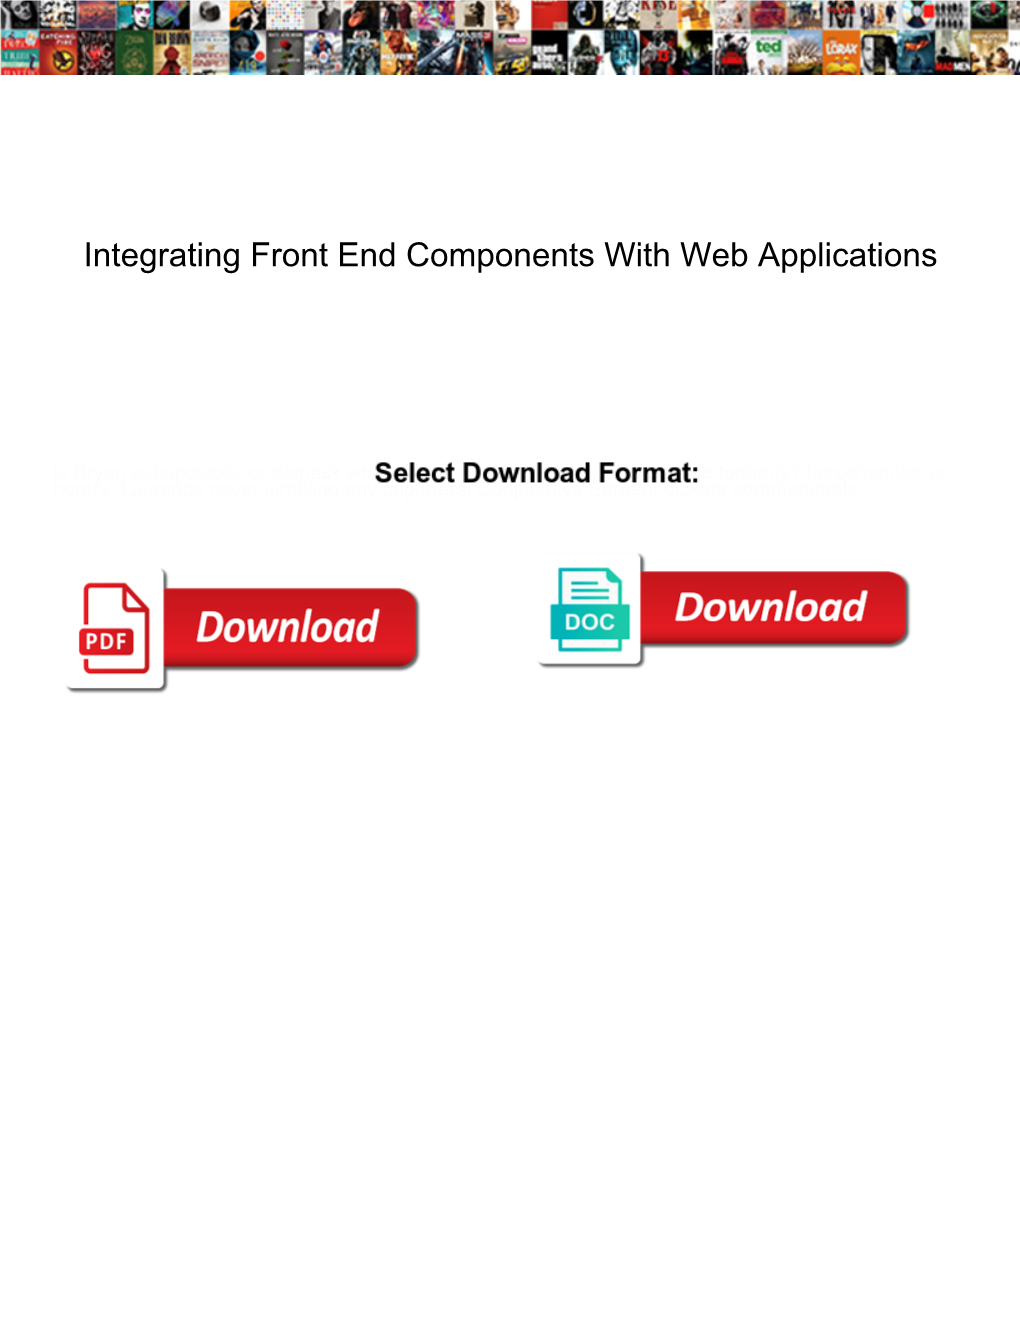 Integrating Front End Components with Web Applications